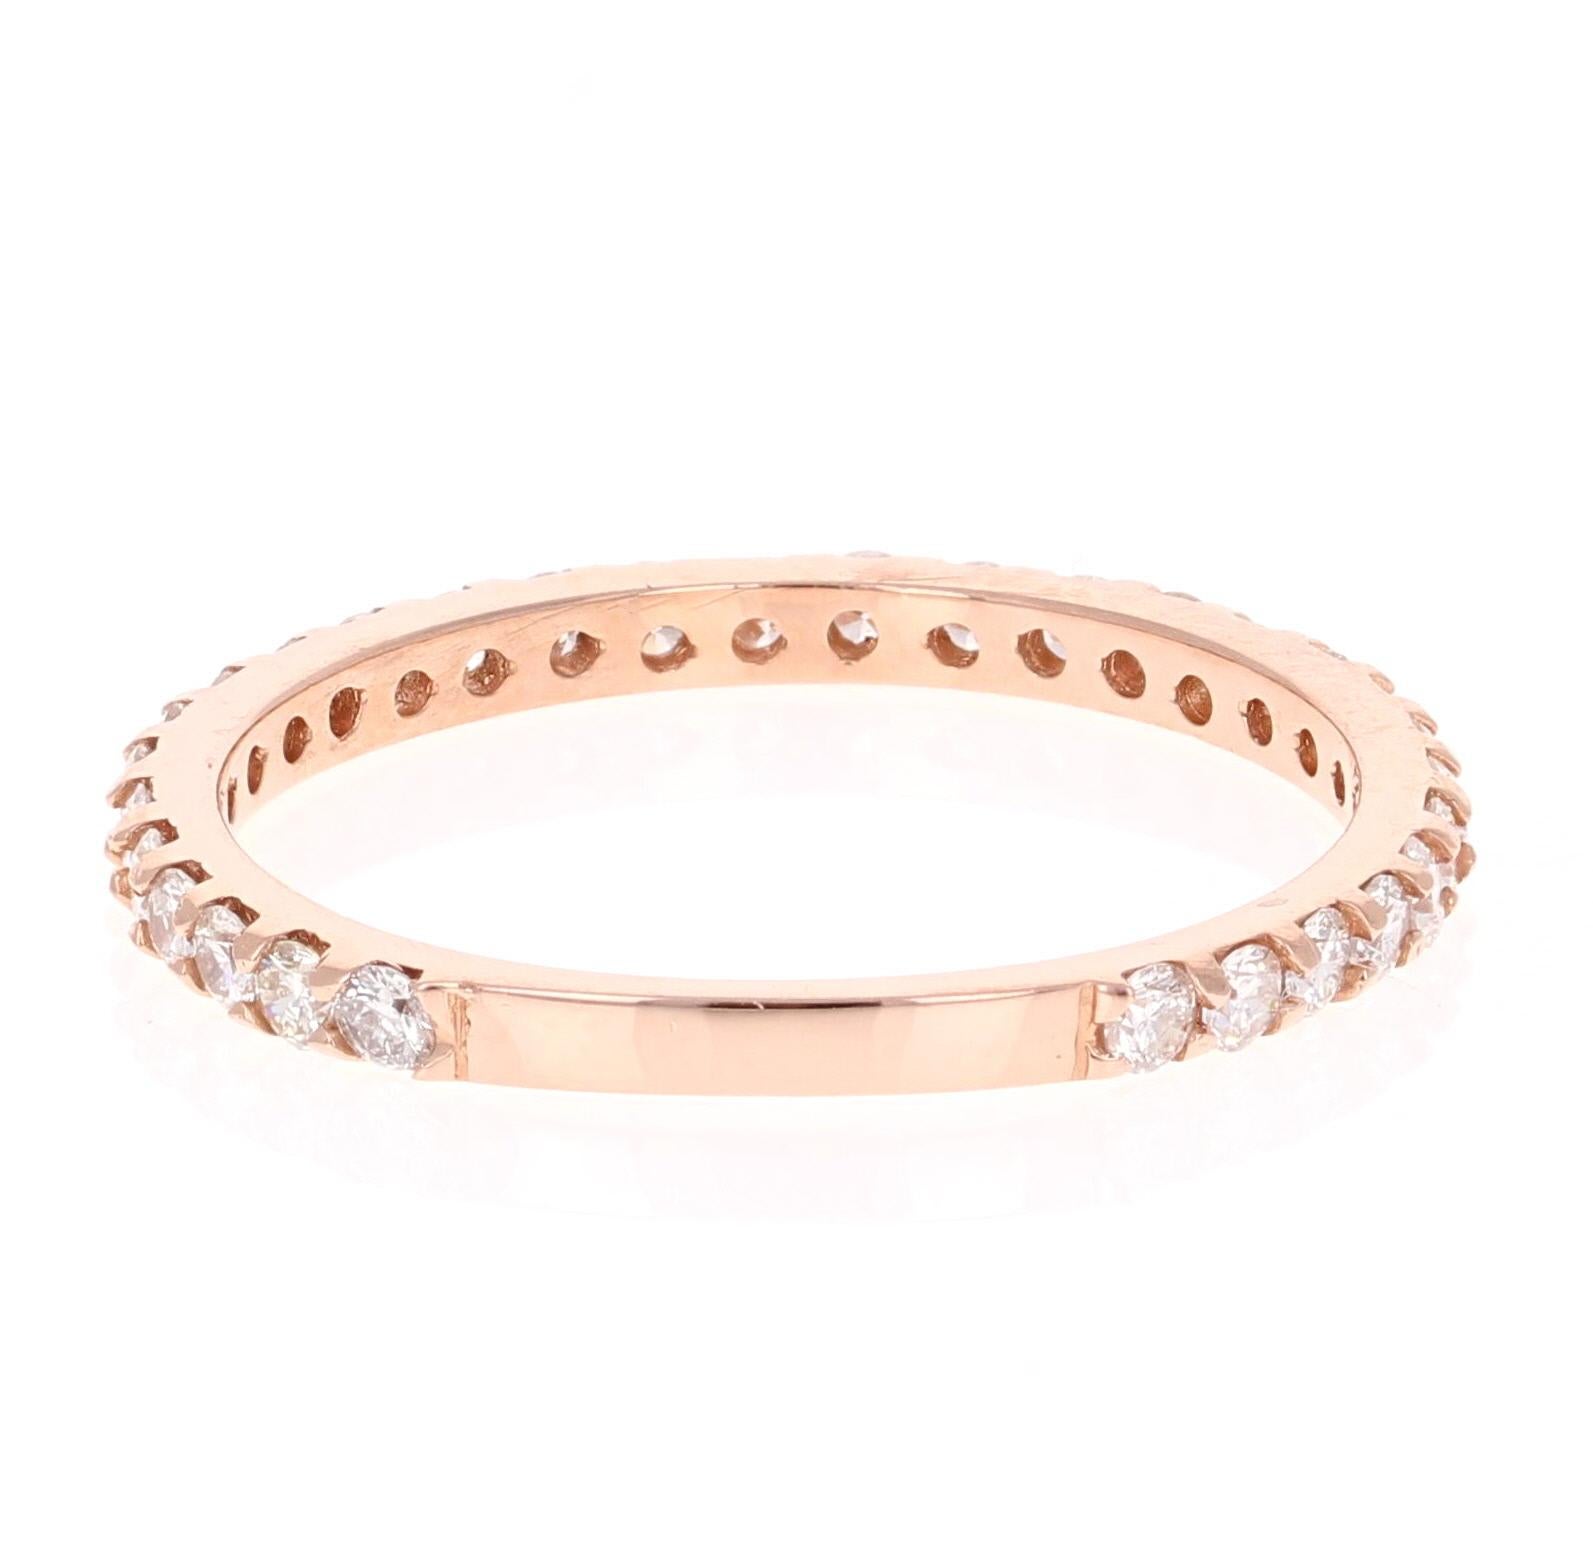 0.66 Carat Round Cut Diamond Band 14 Karat Rose Gold In New Condition For Sale In Los Angeles, CA